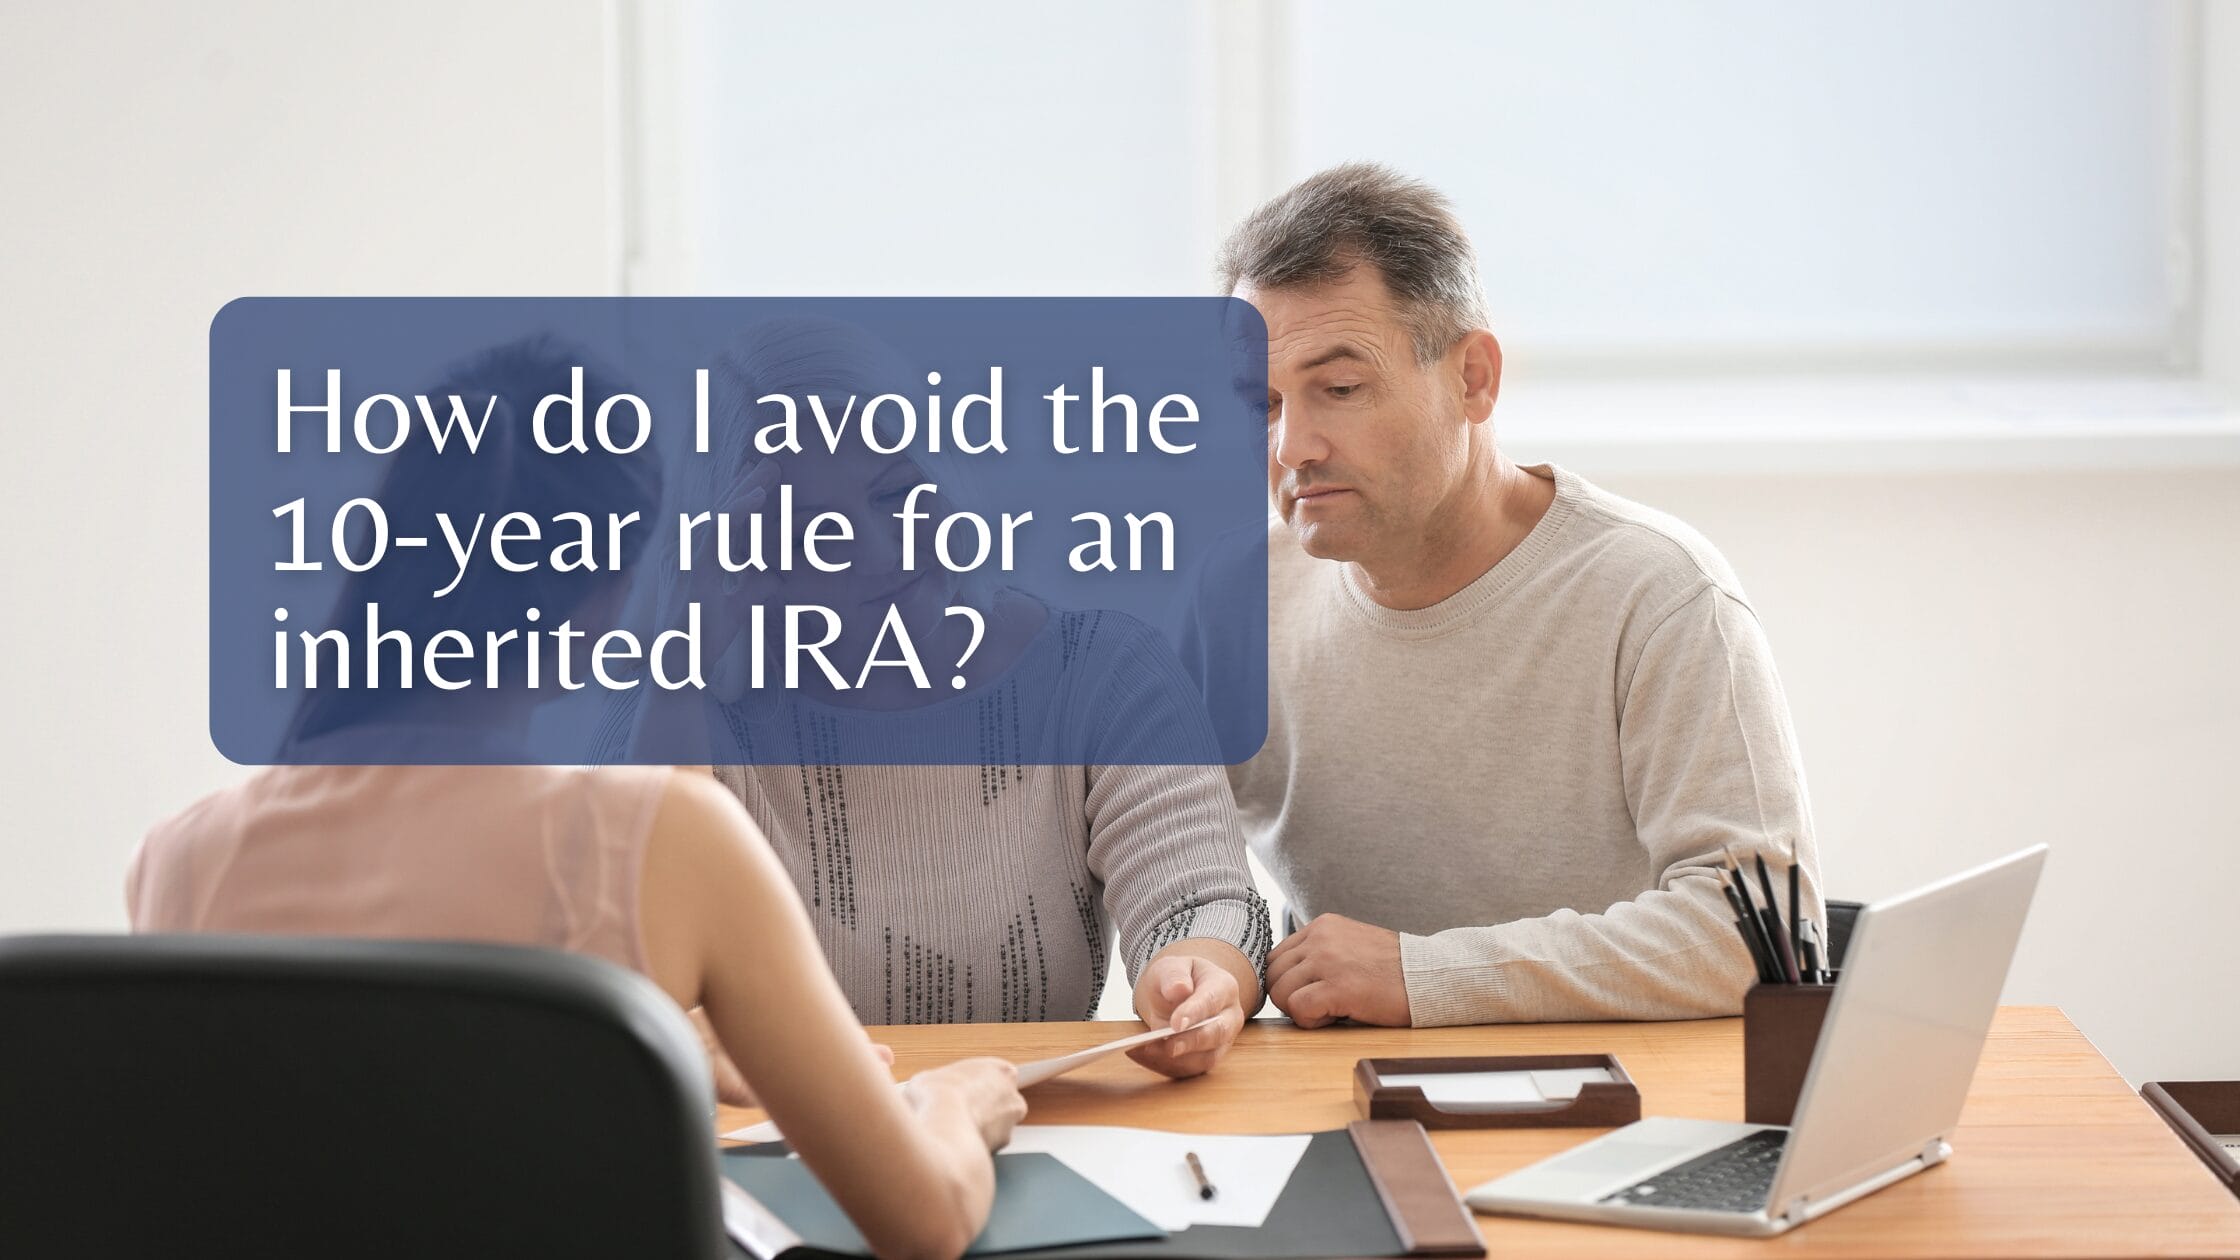 How do I avoid the 10-year rule for an inherited IRA?